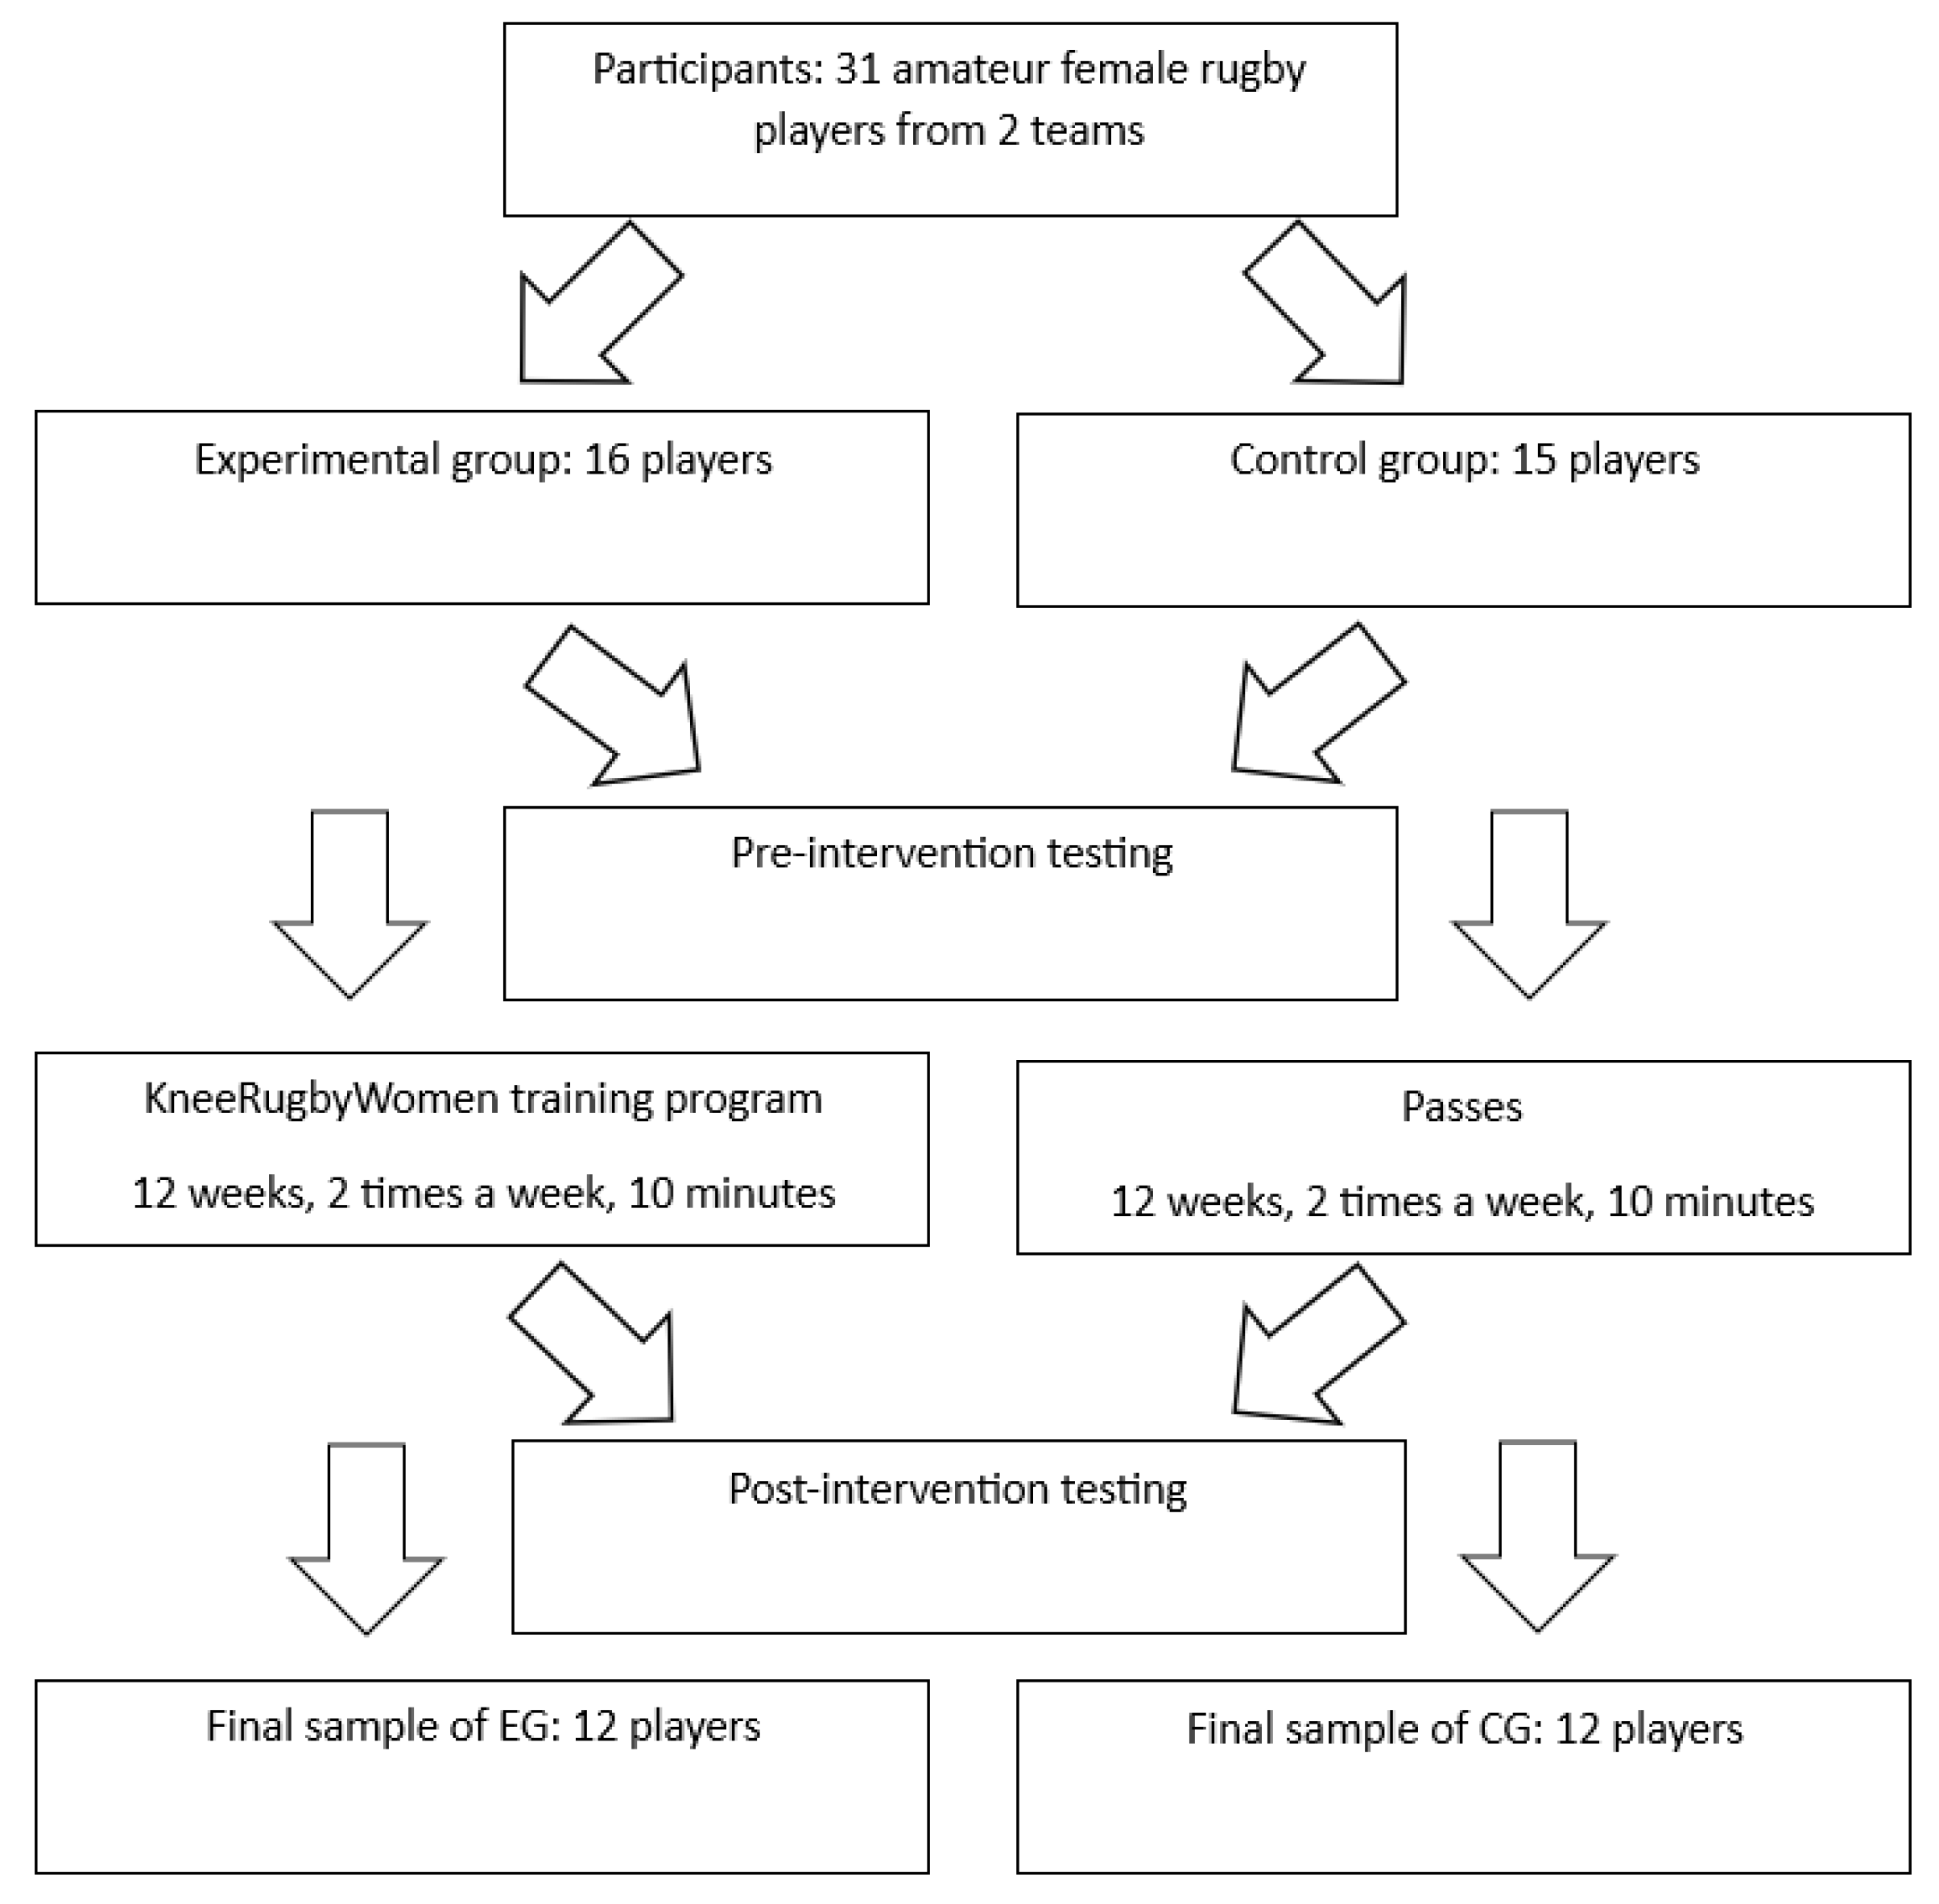 Applied Sciences Free Full-Text The Impact of a Novel Neuromuscular Training Program on Leg Stiffness, Reactive Strength, and Landing Biomechanics in Amateur Female Rugby Players image picture